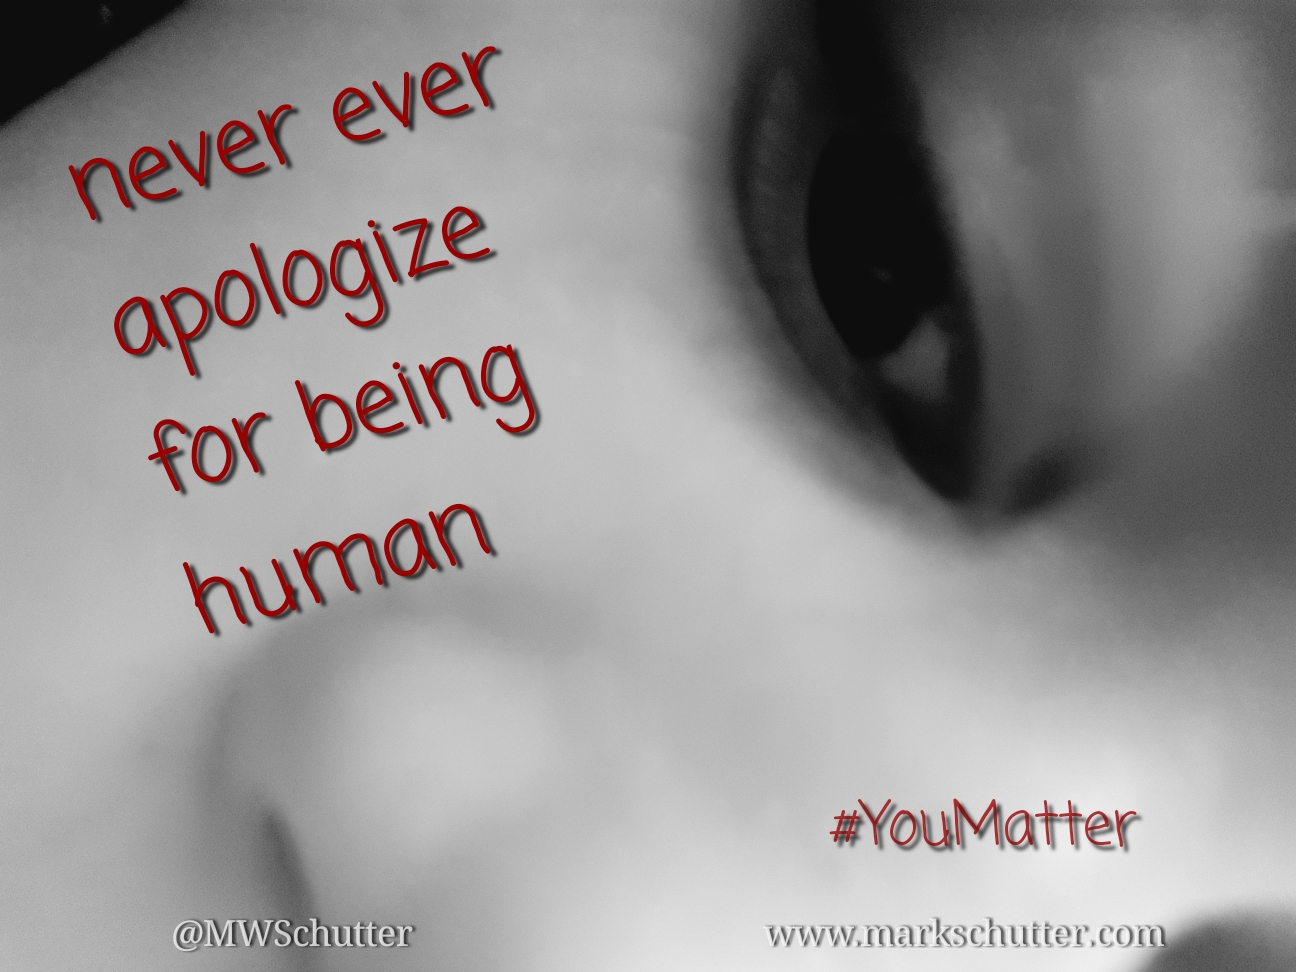 Never Apologize